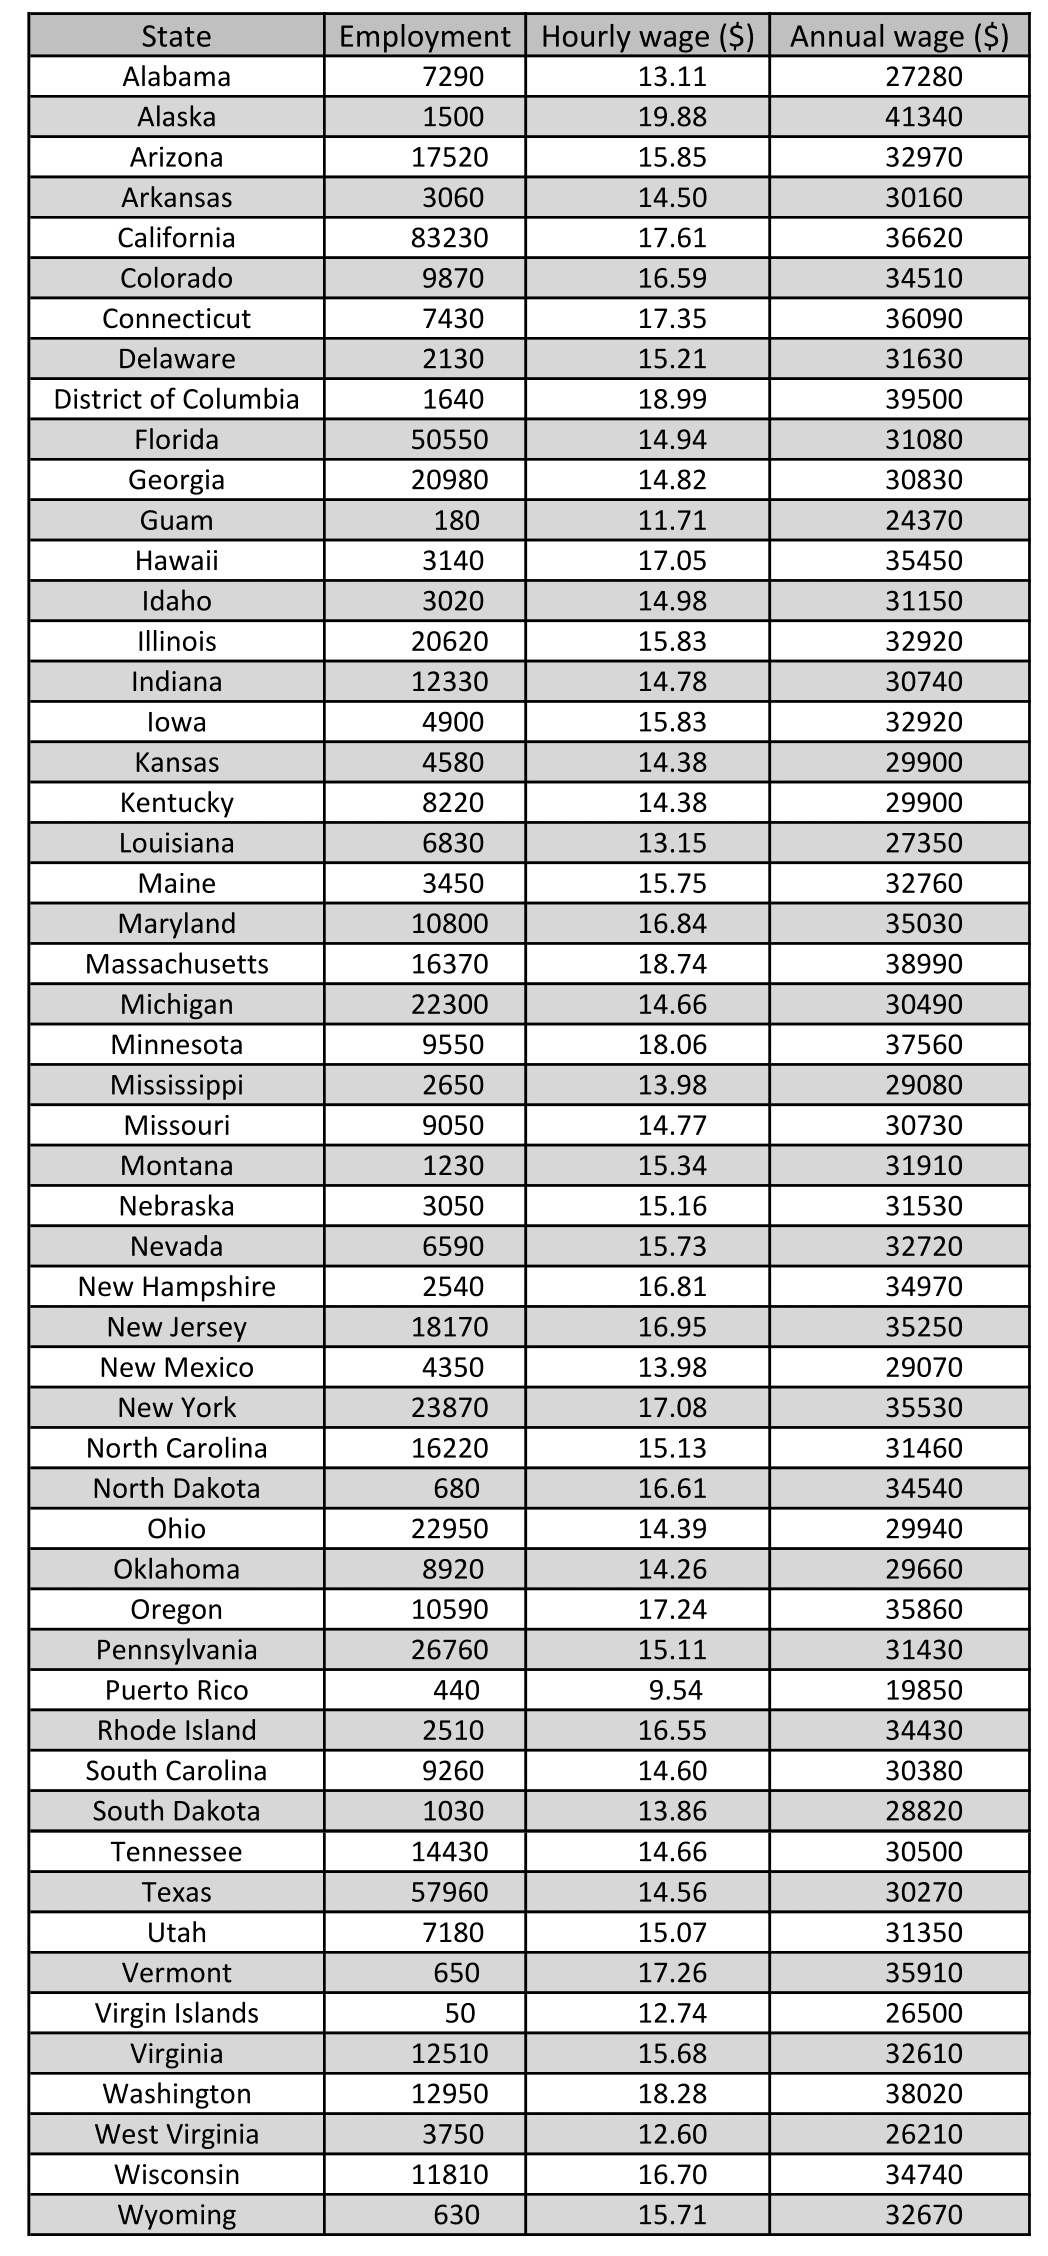 Medical Assistant average hourly wage & salary for all 50 states — AK tops the list at $41k